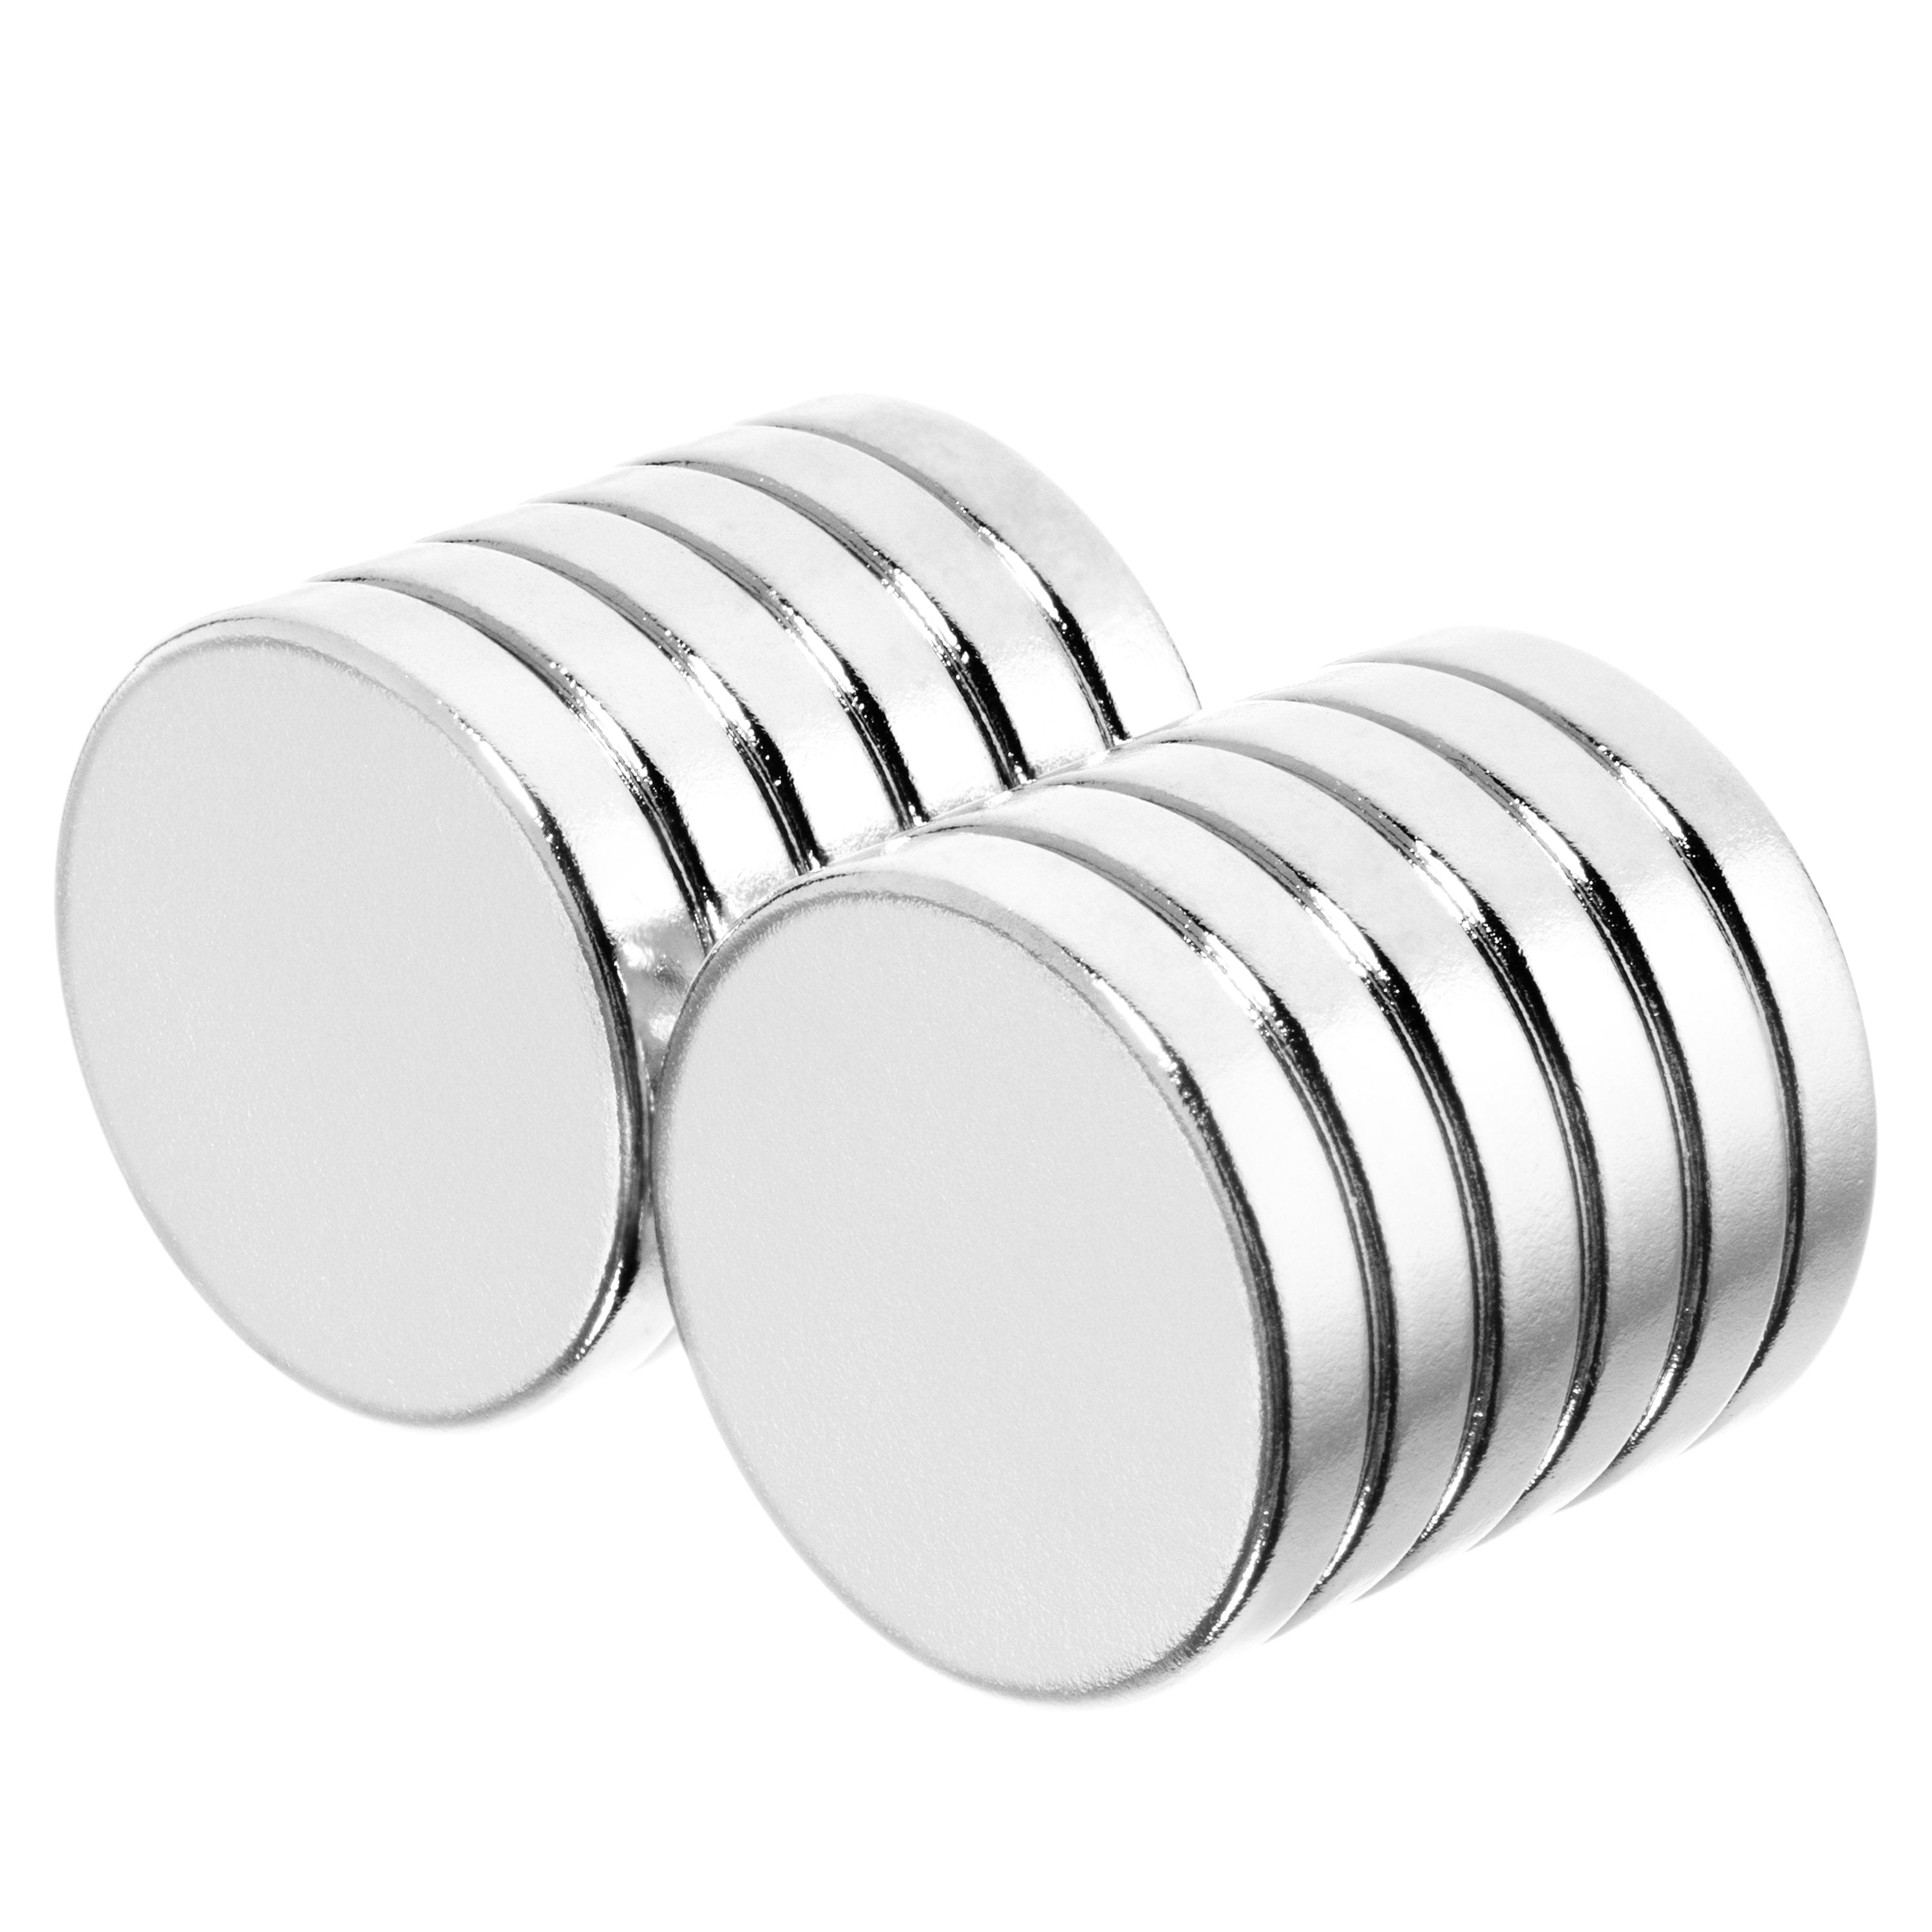 30 Strong 10mm Diameter x 5mm Thick Rare Earth Nickel Neodymium Disc Magnets 